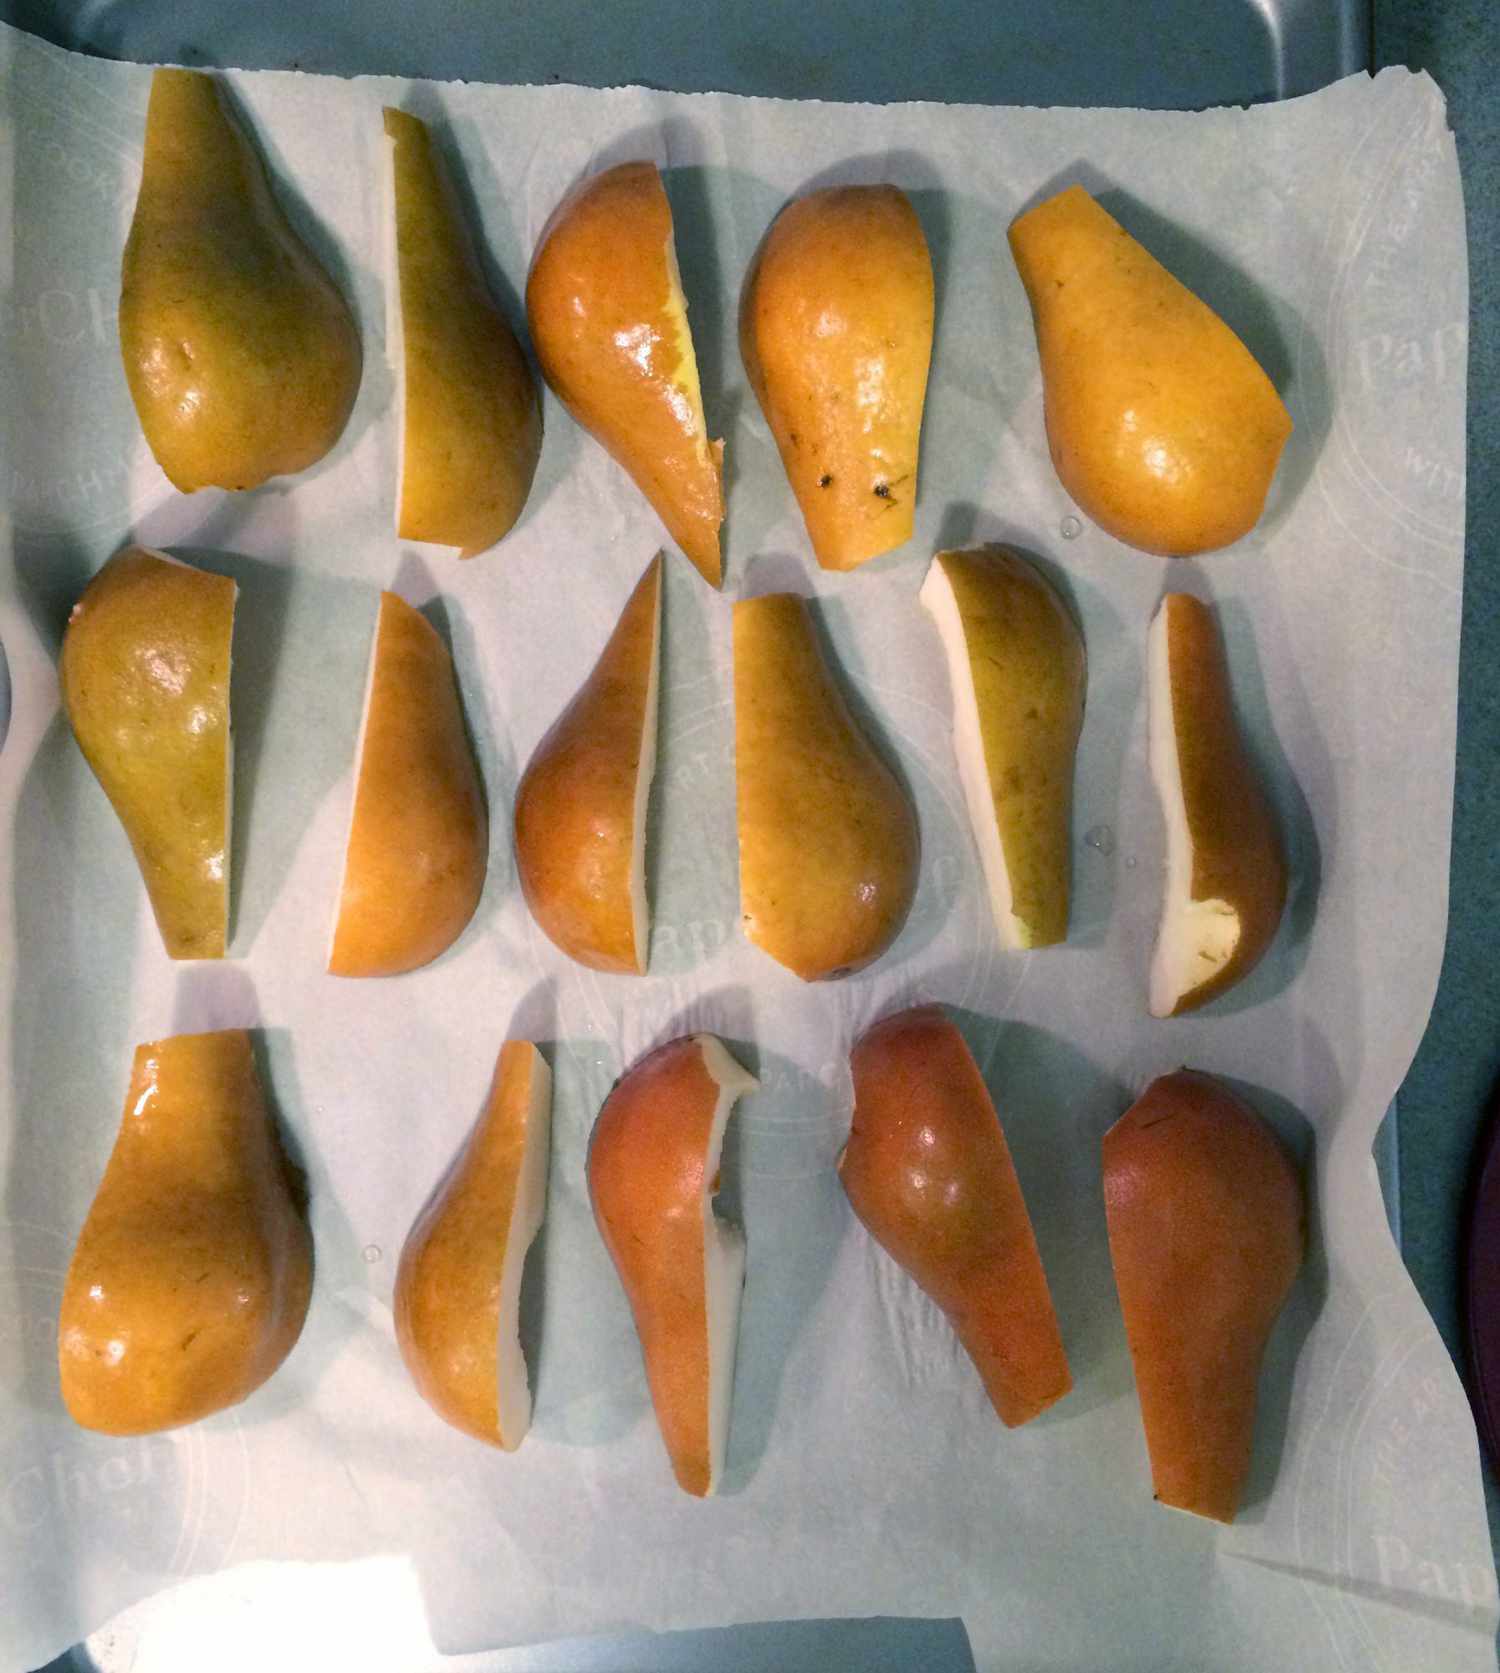 Sliced Pears in Oven